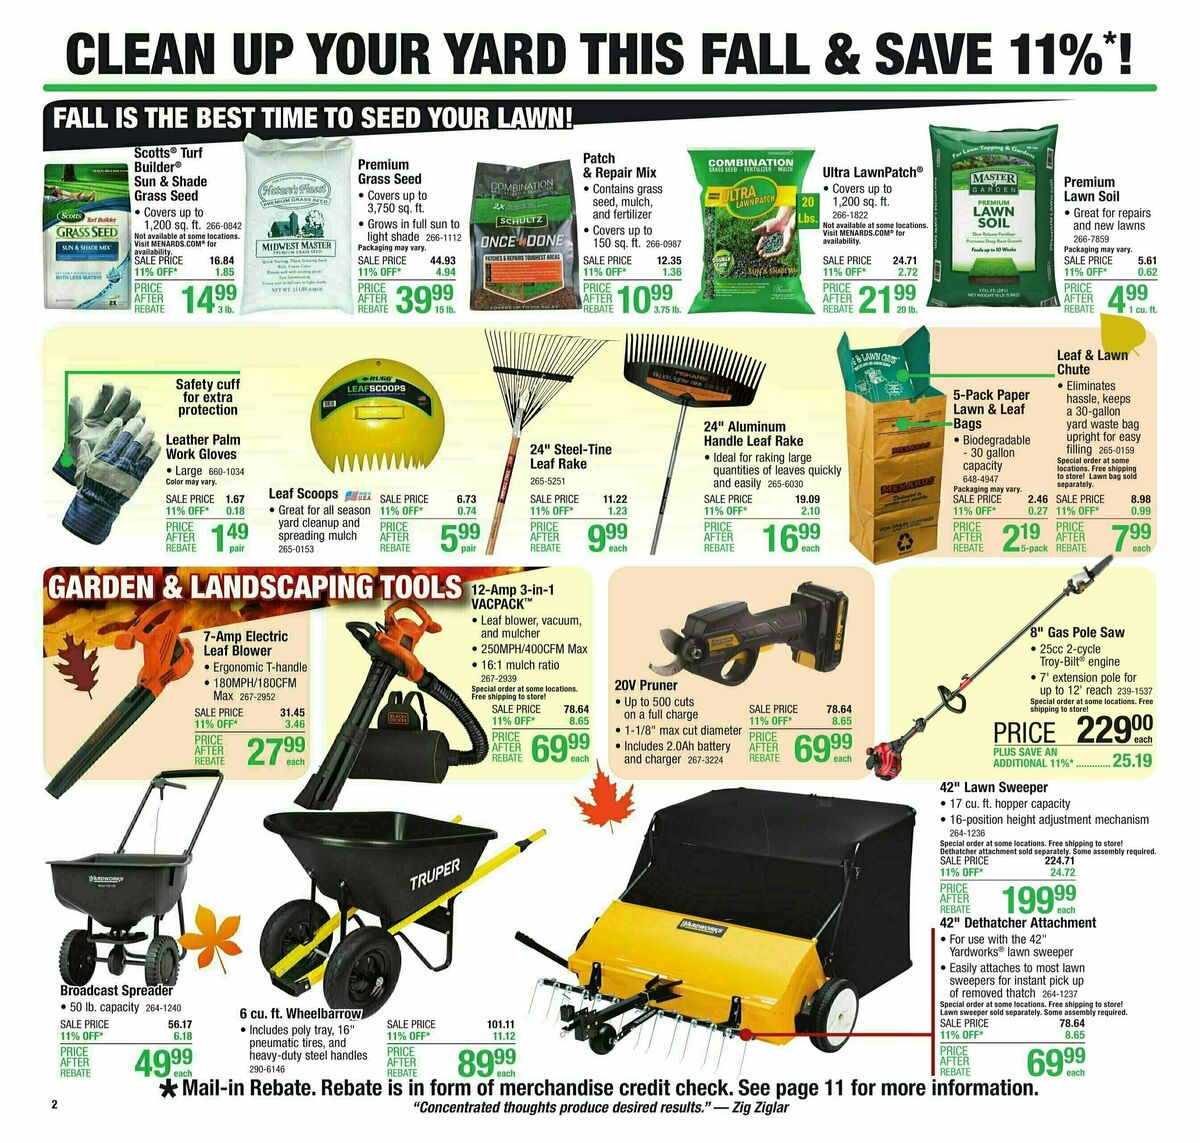 Menards Weekly Ad from September 13